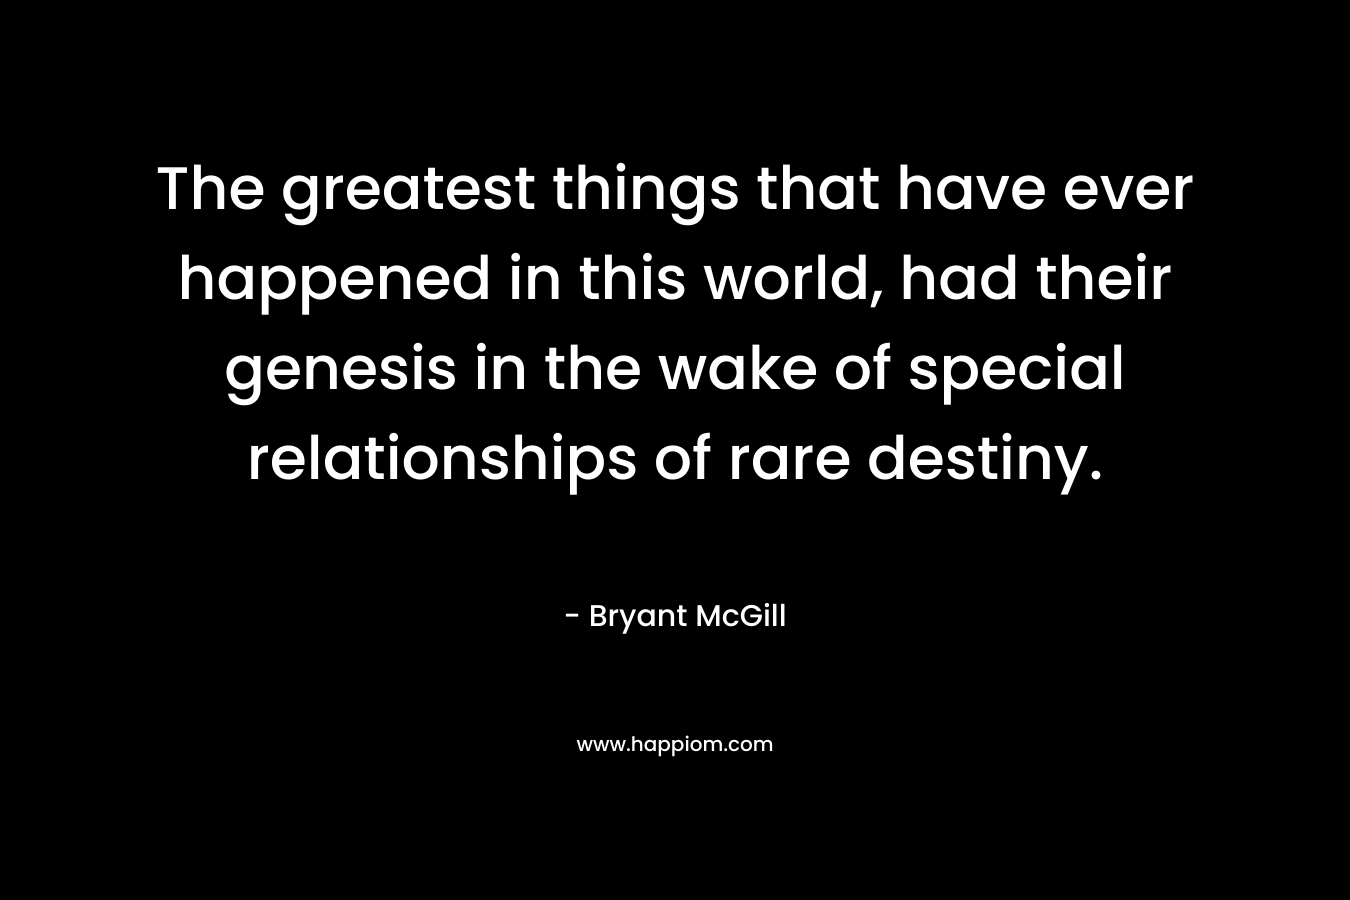 The greatest things that have ever happened in this world, had their genesis in the wake of special relationships of rare destiny.